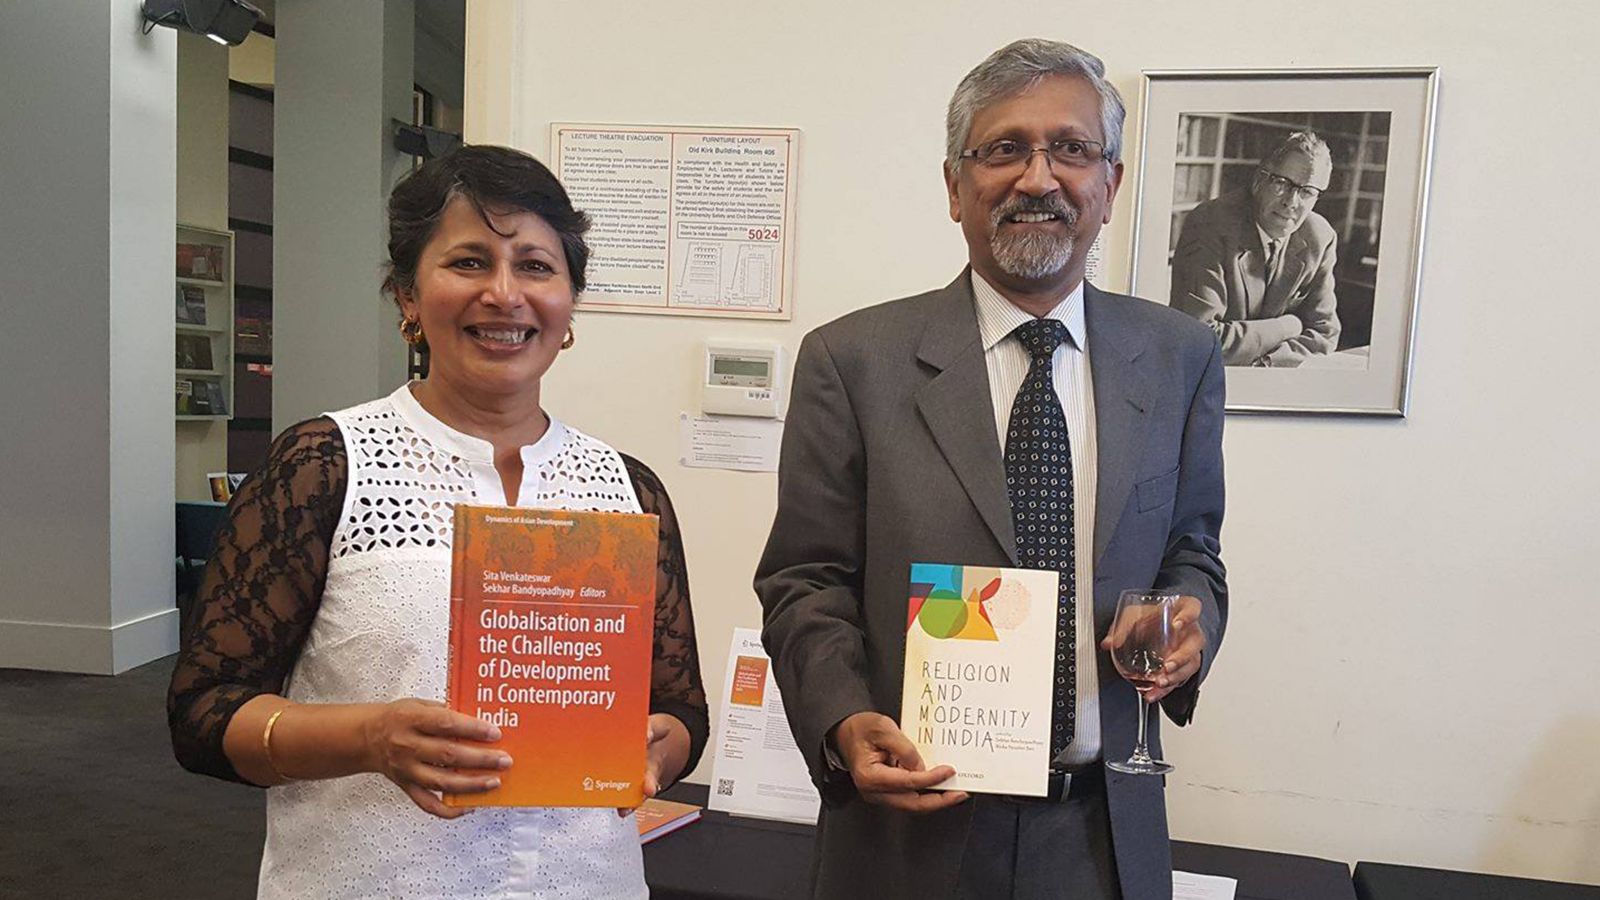 Sita Venkateswar and Sekhar Bandyopadhyay at launch of their book Globalisation and the Challenges of Development in Contemporary India.